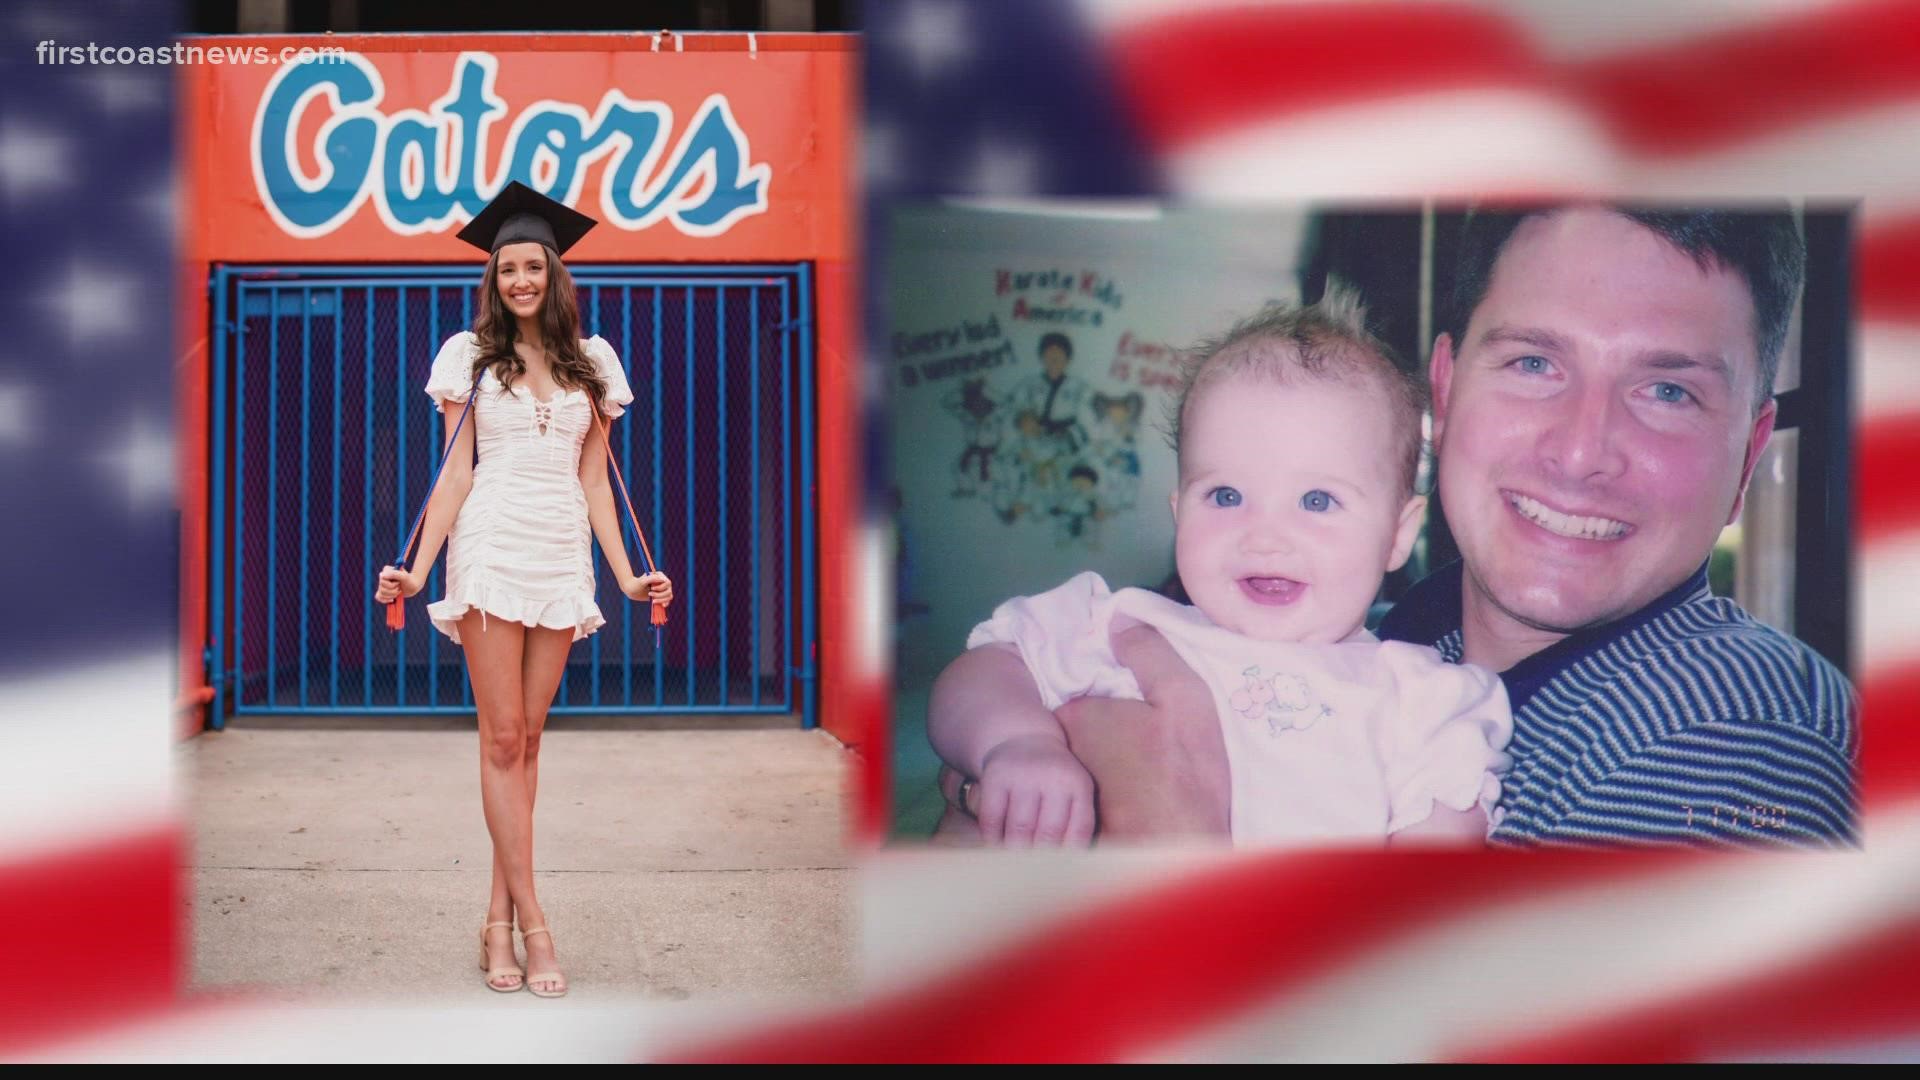 Abbie Chalfant lost her father in 2002 when he crashed off the coast of Puerto Rico while preparing for a deployment.